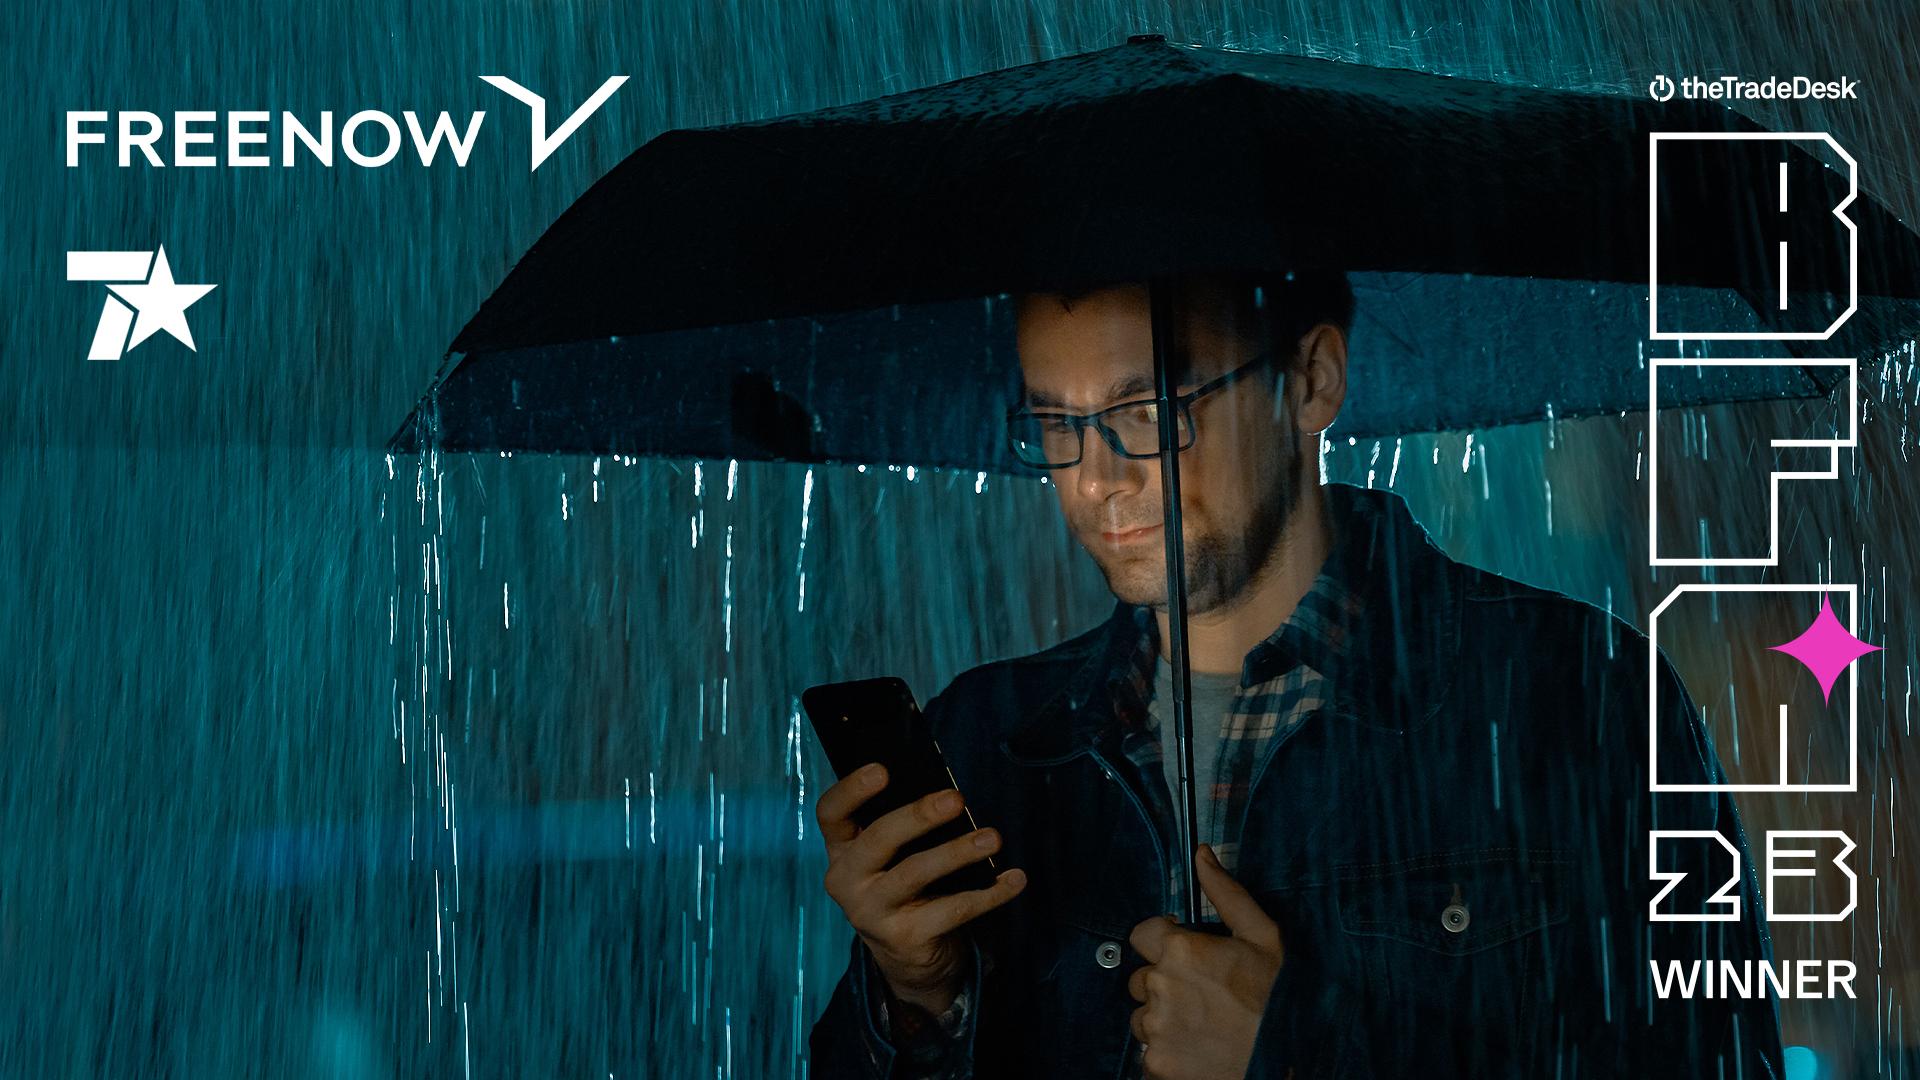 Image of a man holding an umbrella in the rain with text "FREENOW Case Study with The Trade Desk - BFA '23 Winner"